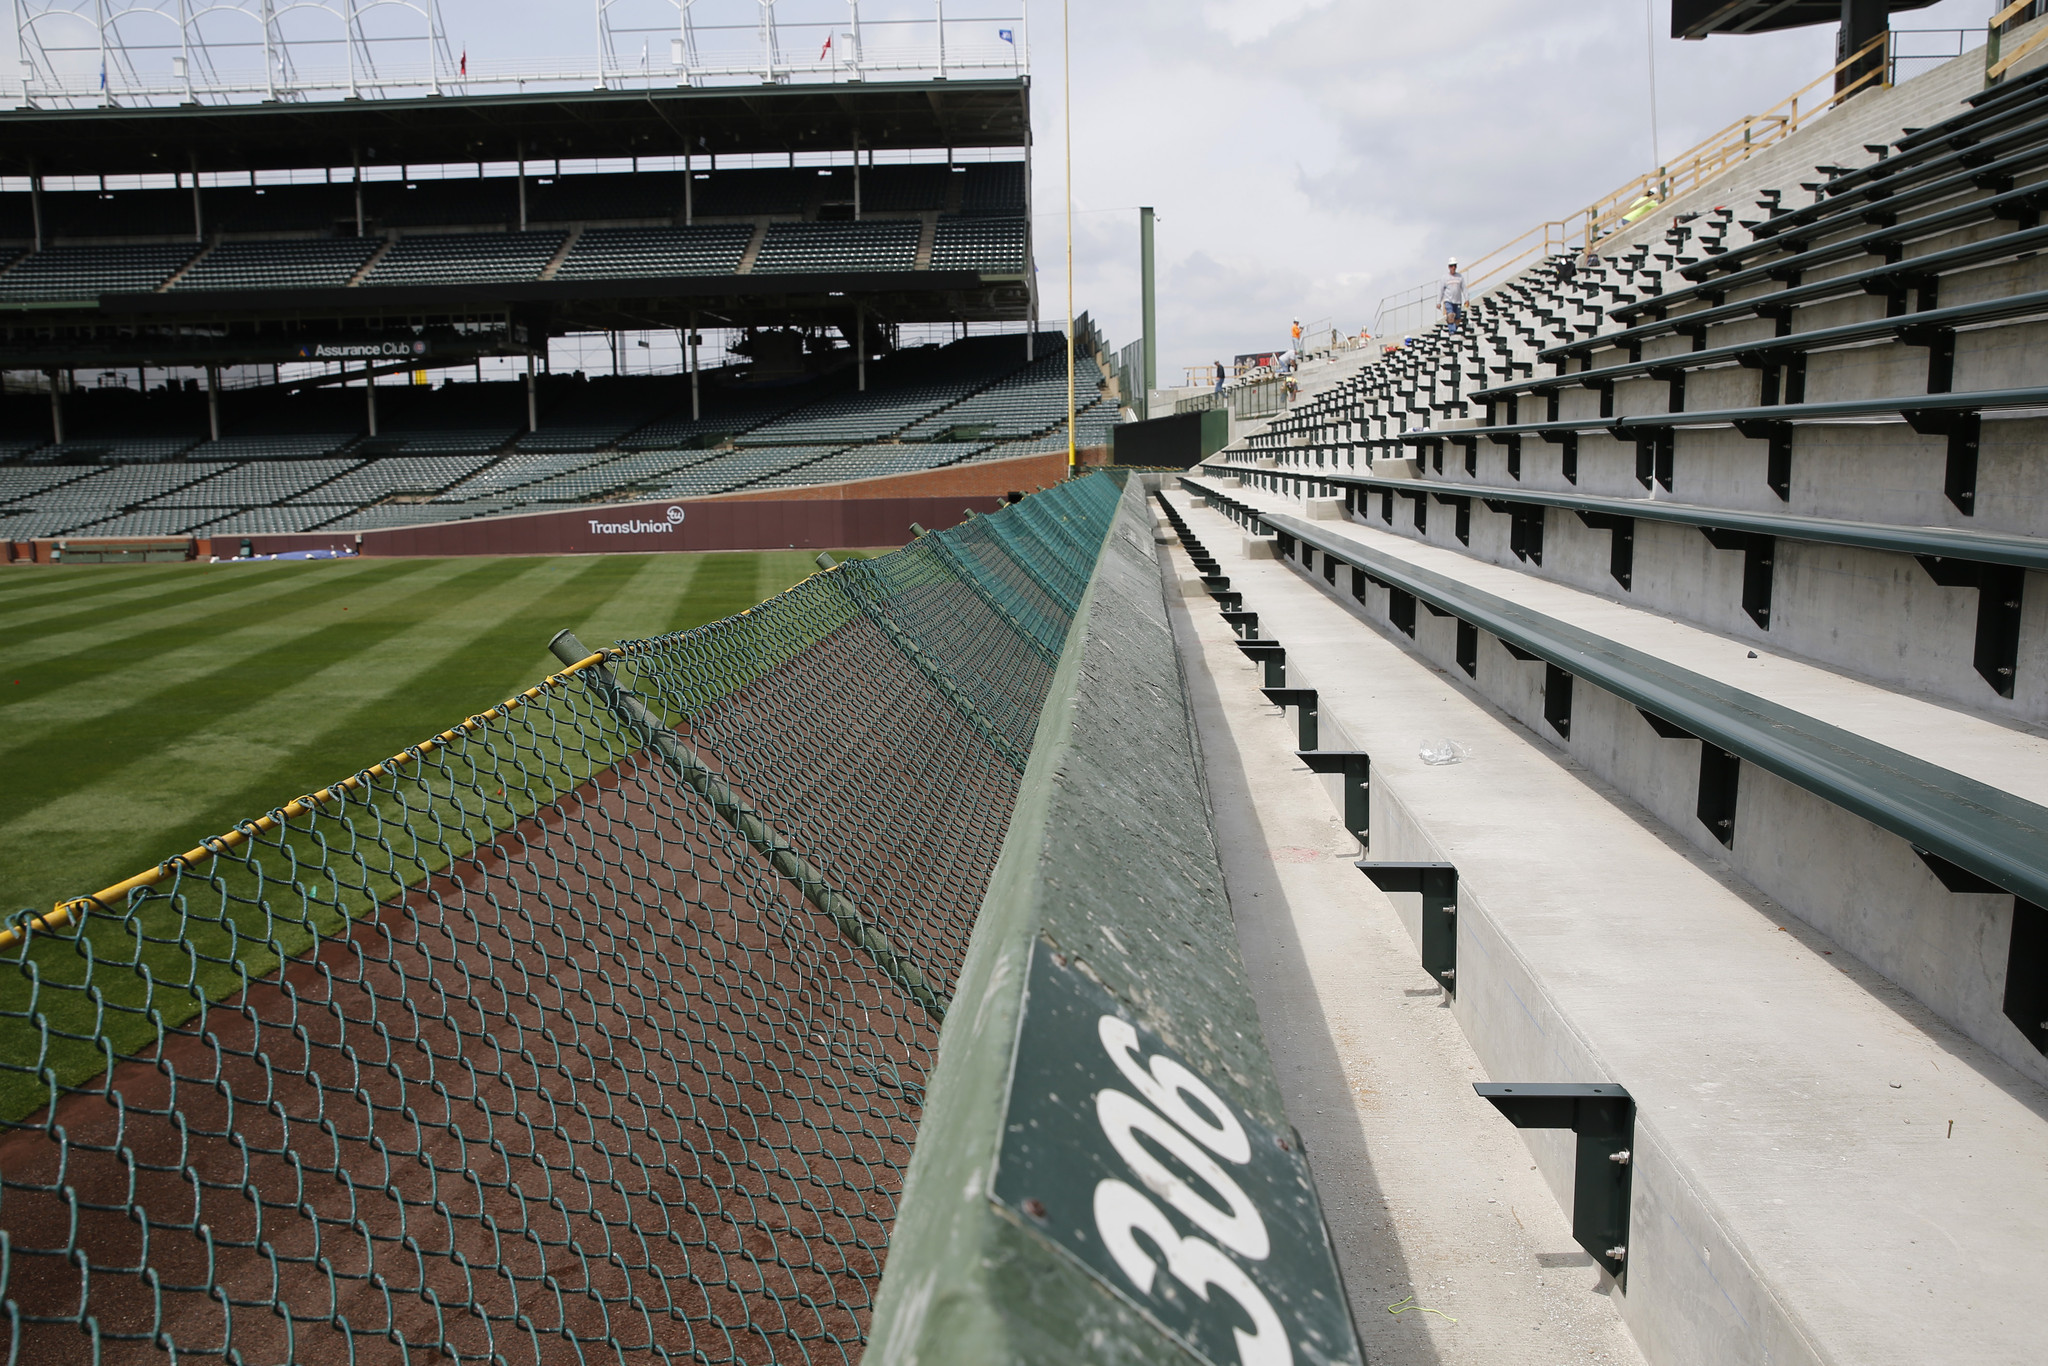 Cubs players welcome 'energy' from fans when Wrigley bleachers reopen ...